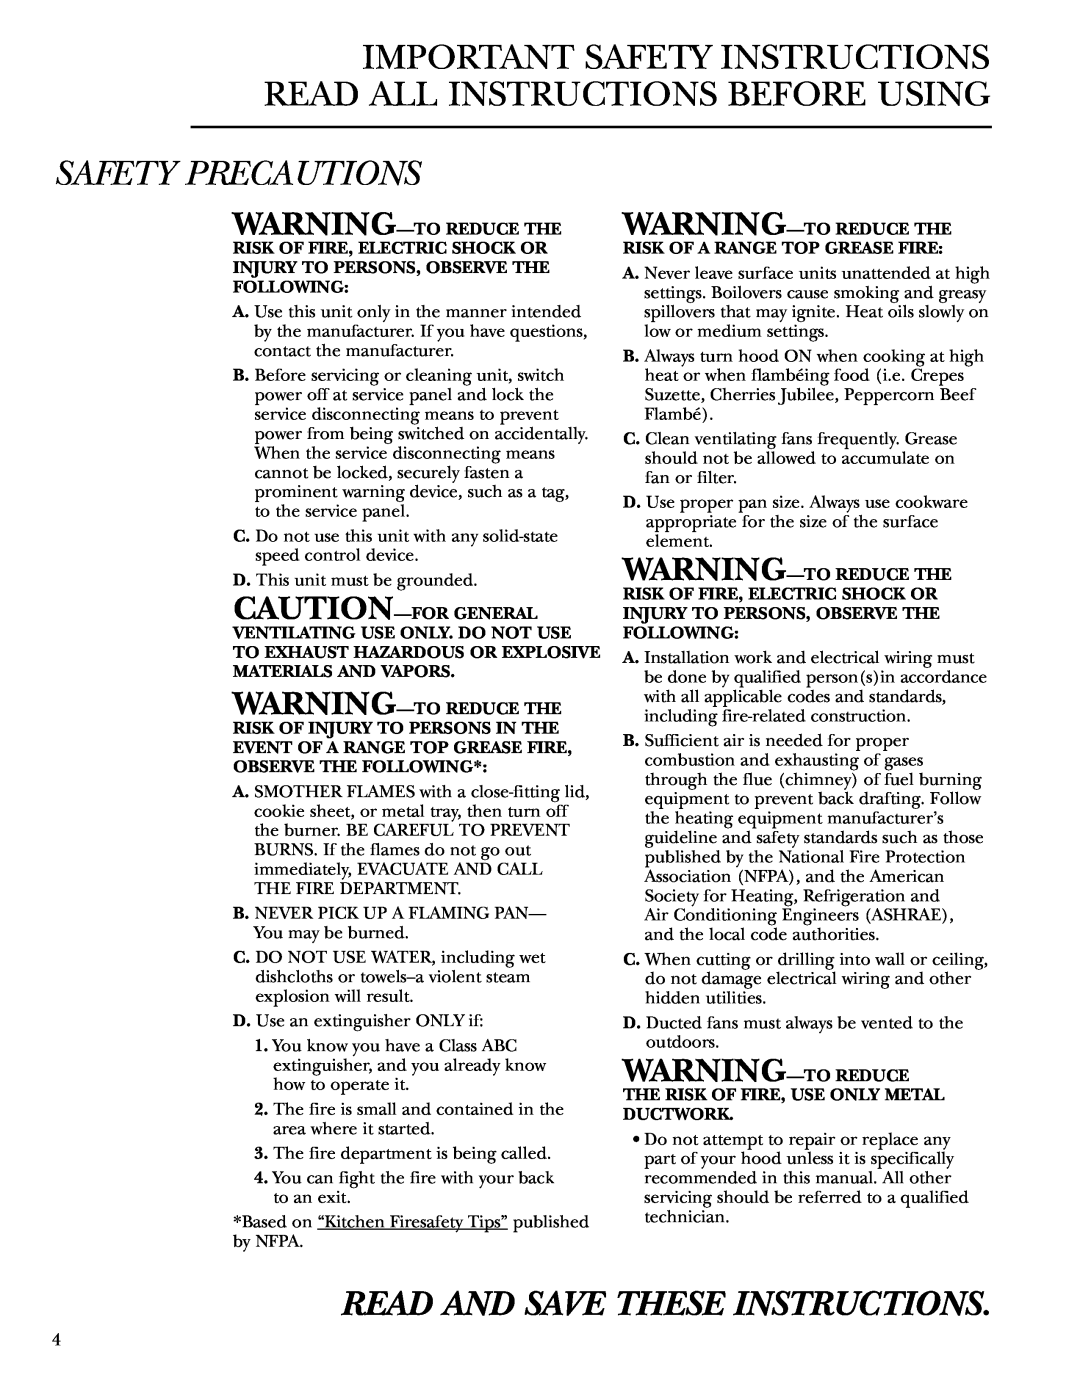 GE Monogram ZV750 owner manual Safety Precautions, Read And Save These Instructions 